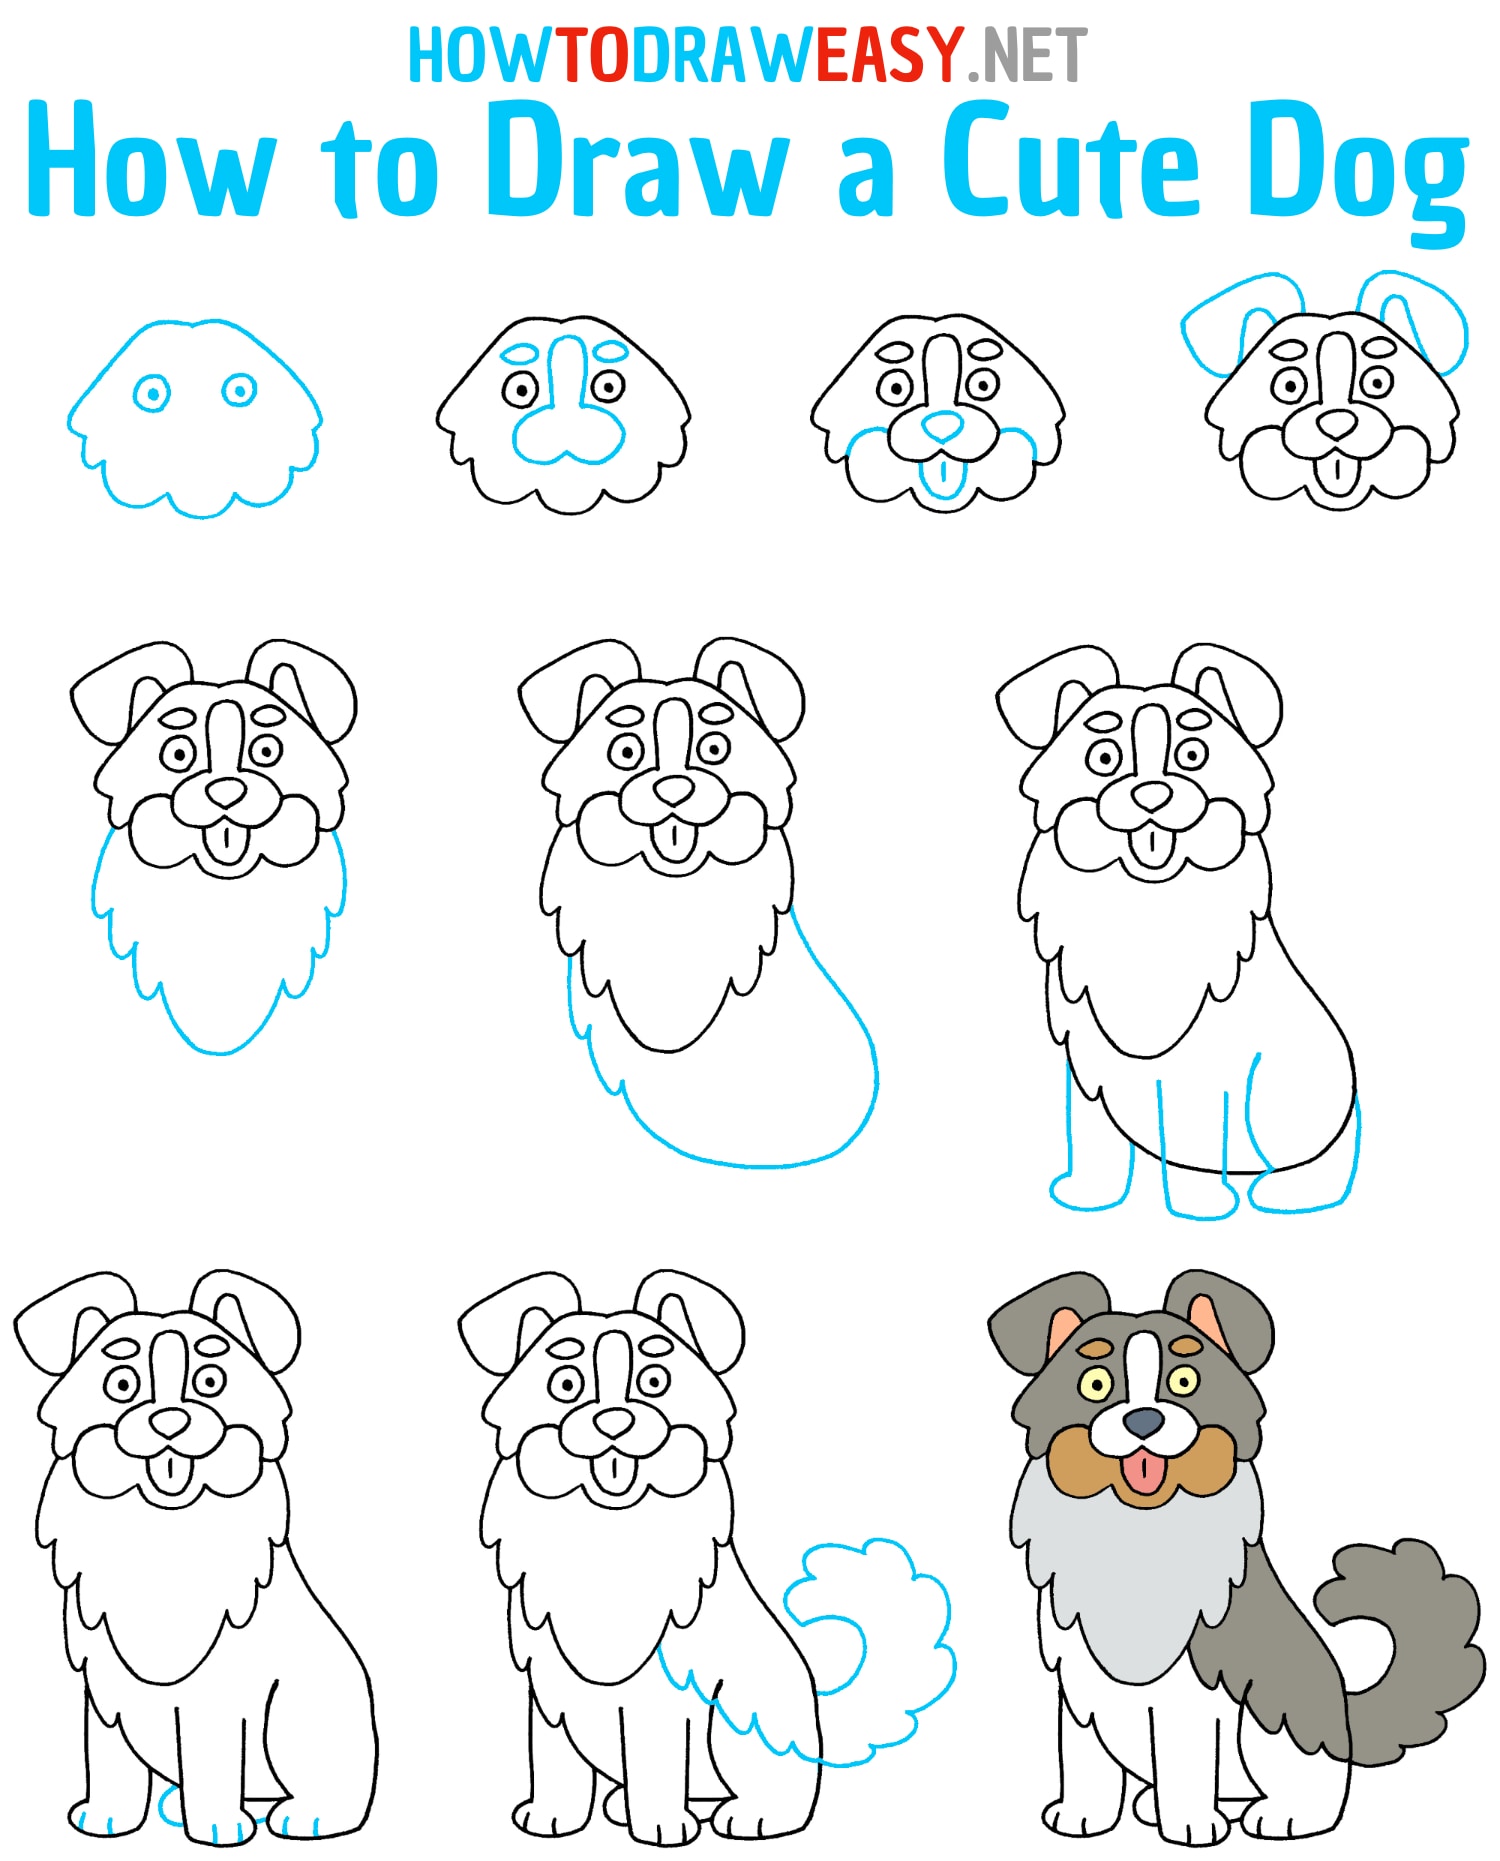 How to Draw a Cute Dog Step by Step